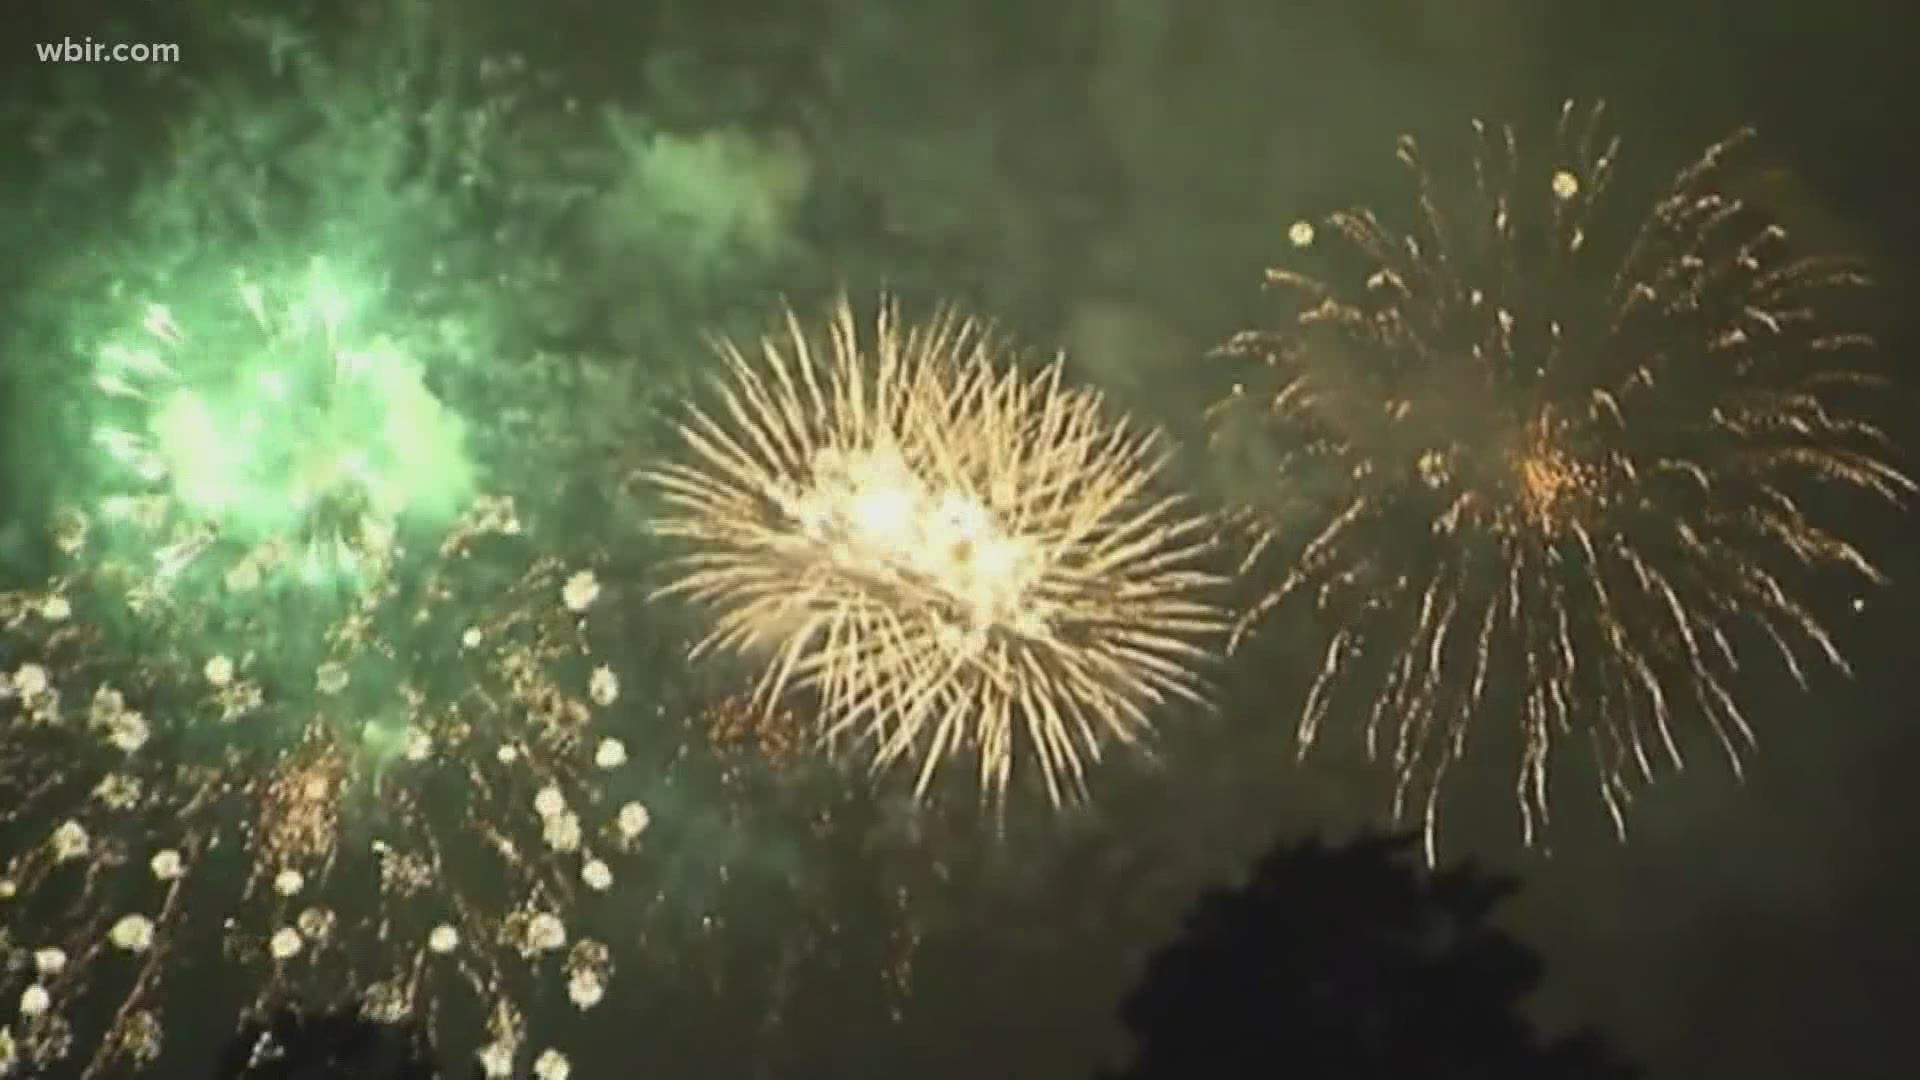 10News reporter Cole Sullivan shows us why officers expected a spike of illegal fireworks around the 4th.